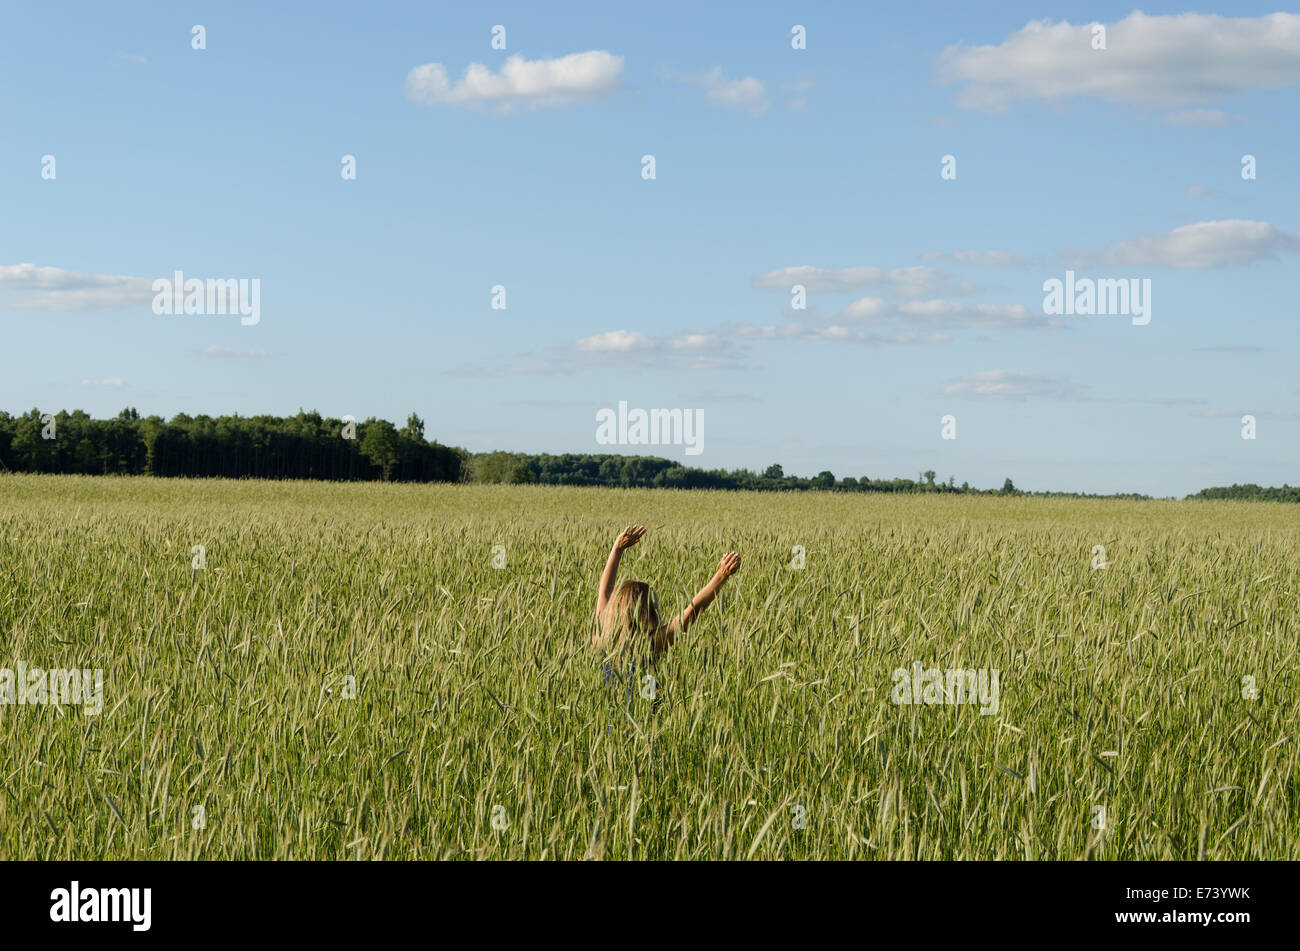 Farmer blond woman girl swing together with cereal wheat ear plants in wind. Feel sense of nature. Stock Photo